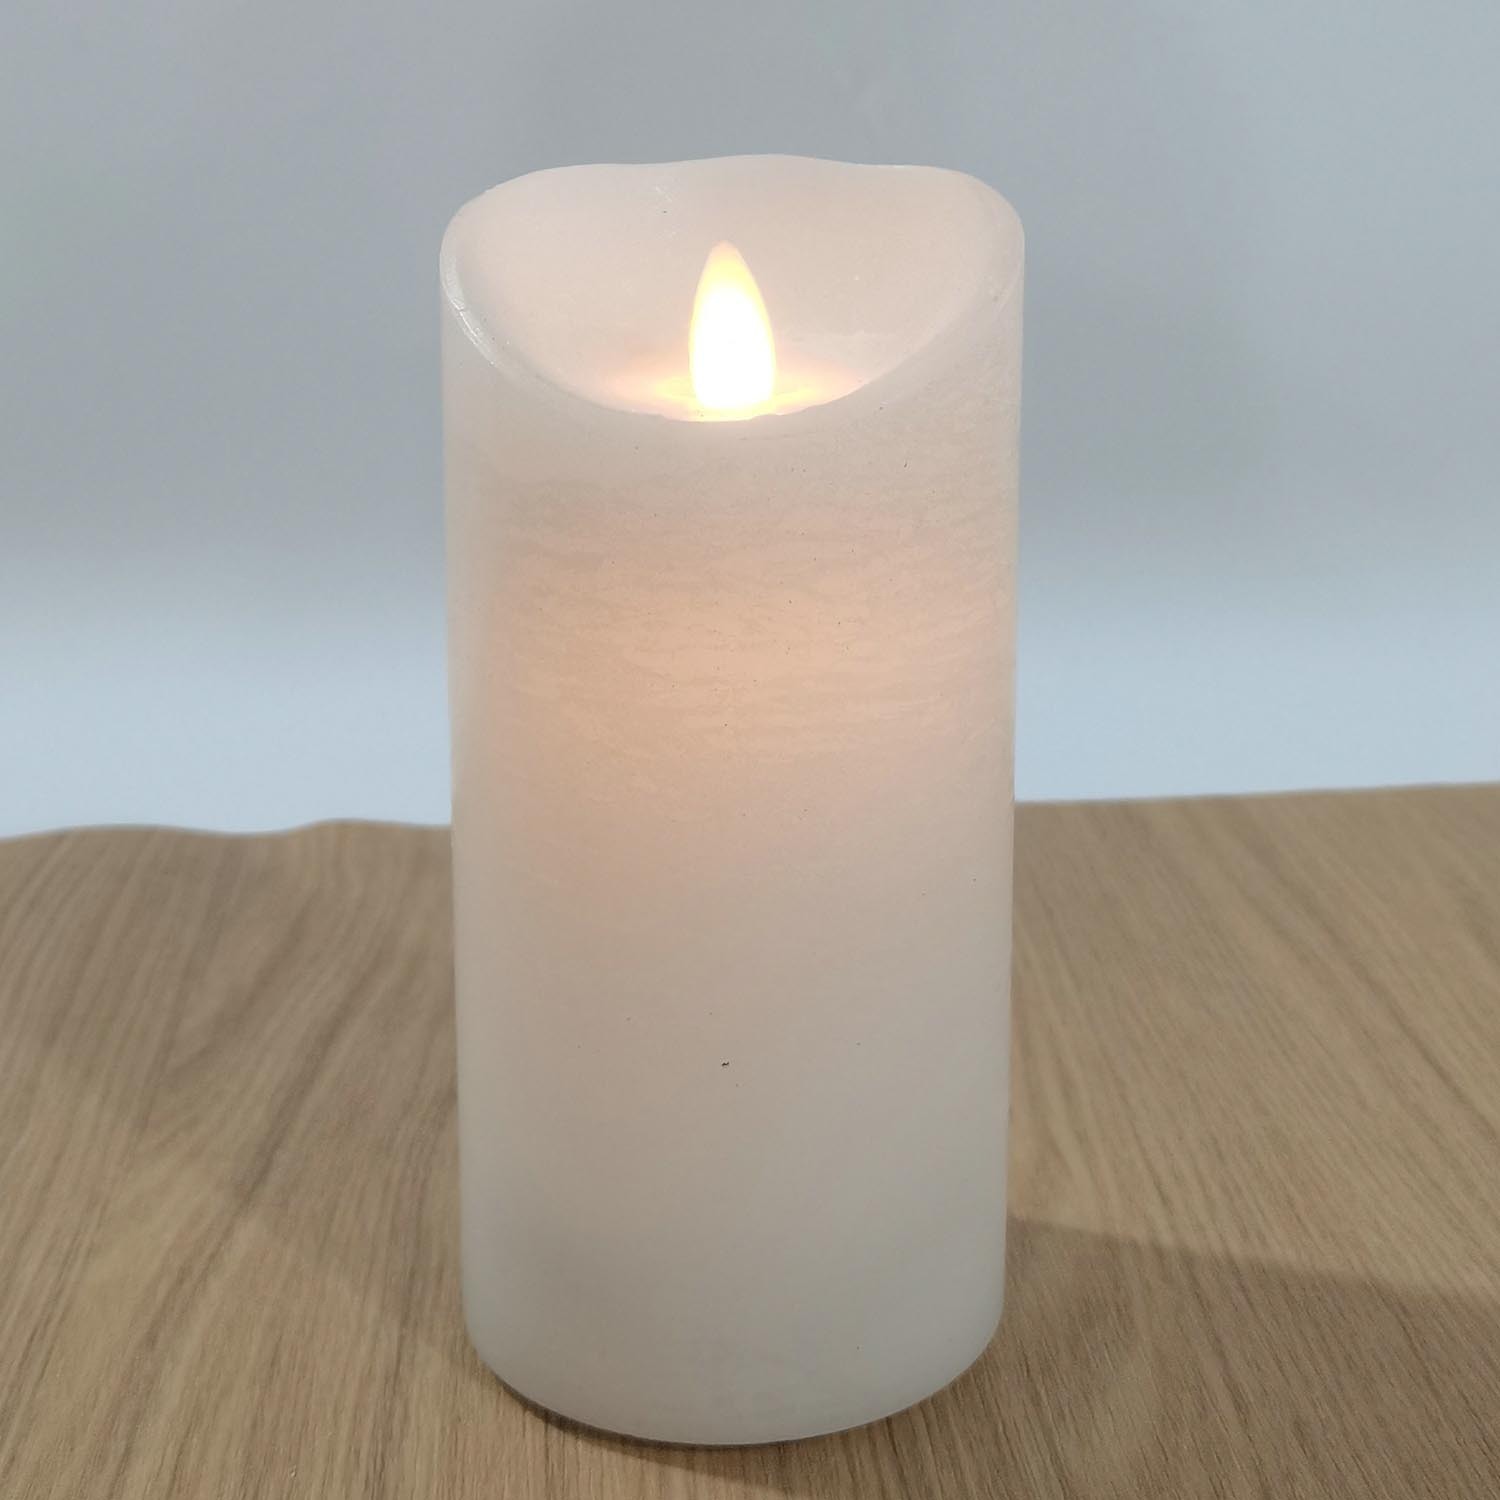 Tall Cosy Cotton LED Flameless Pillar Candle Image 2